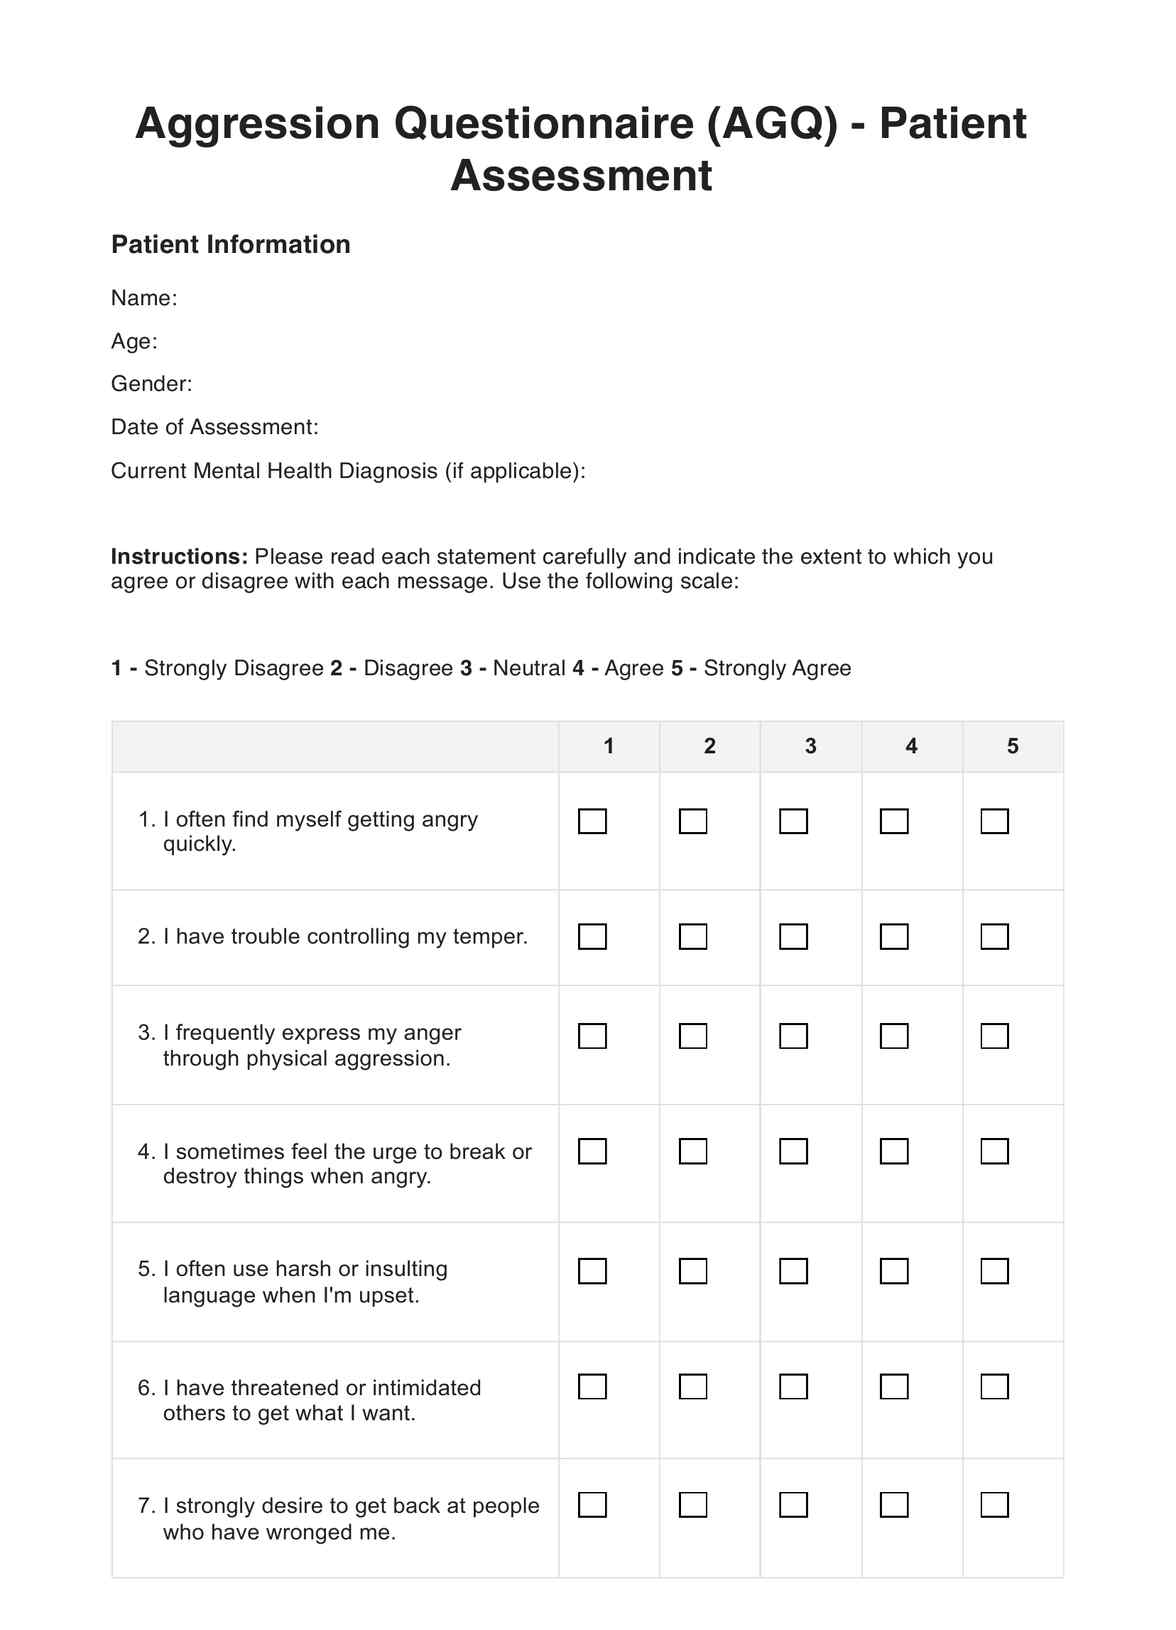 Aggression Questionnaire PDF Example